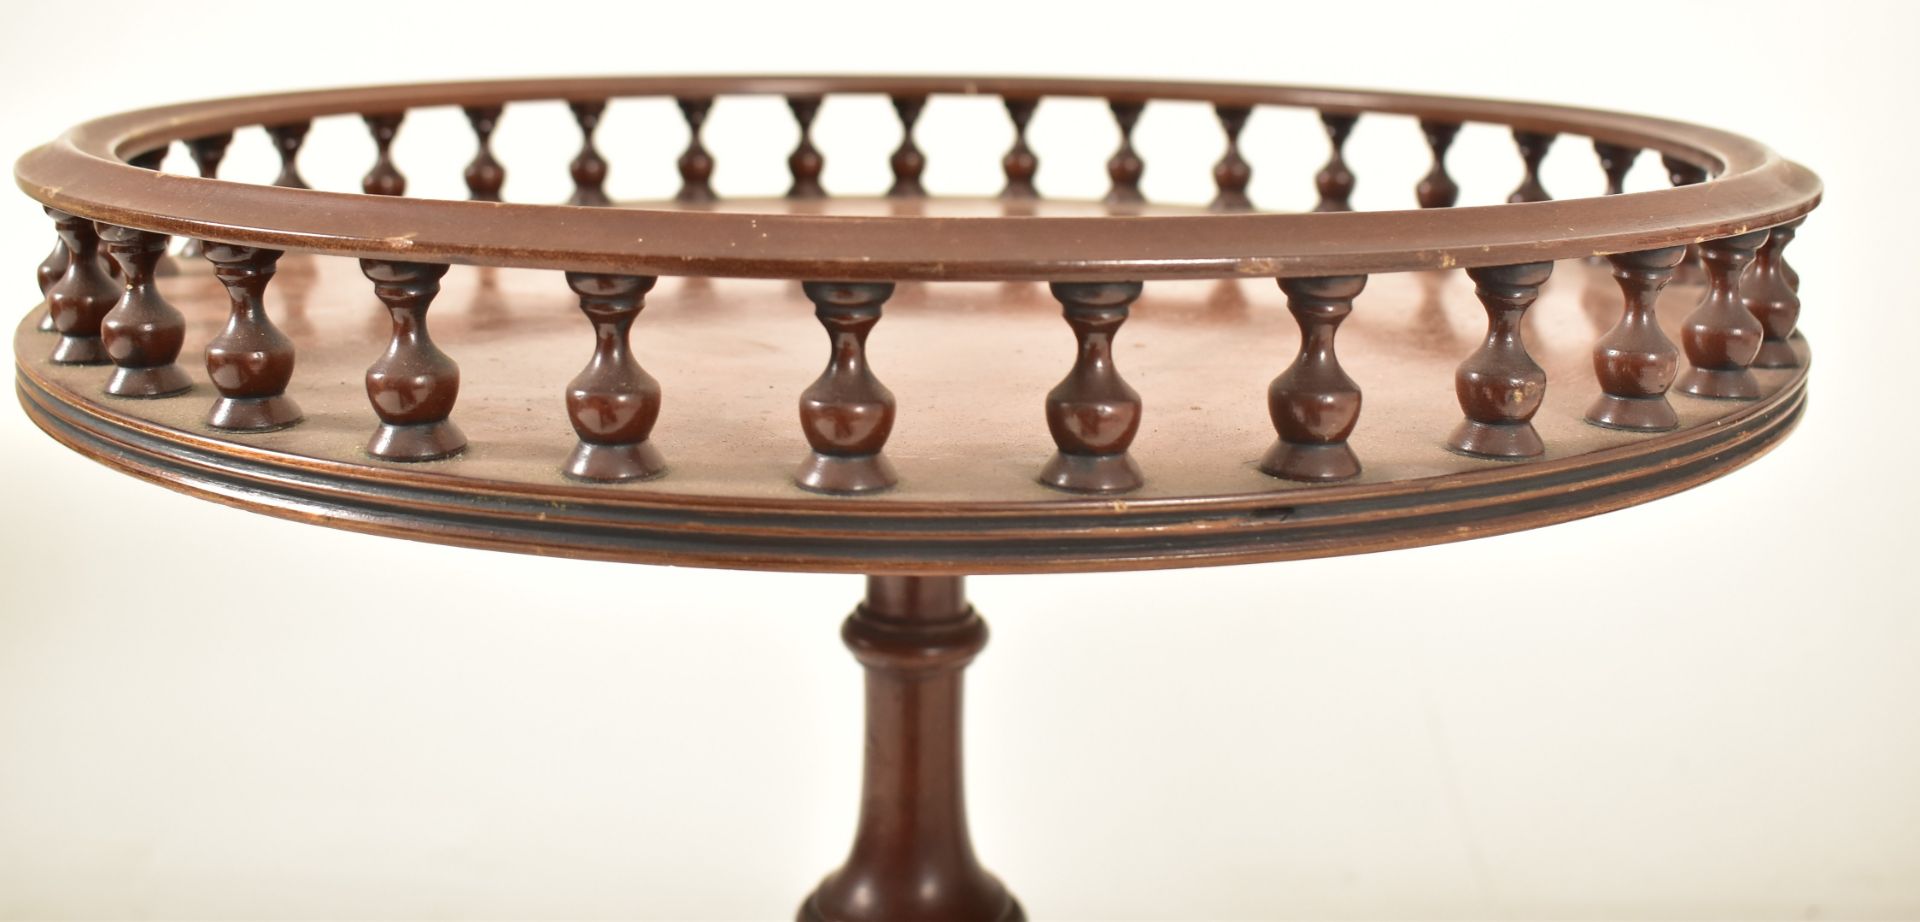 MATCHED PAIR OF REGENCY REVIVAL WINE TRIPOD TABLES - Image 5 of 7